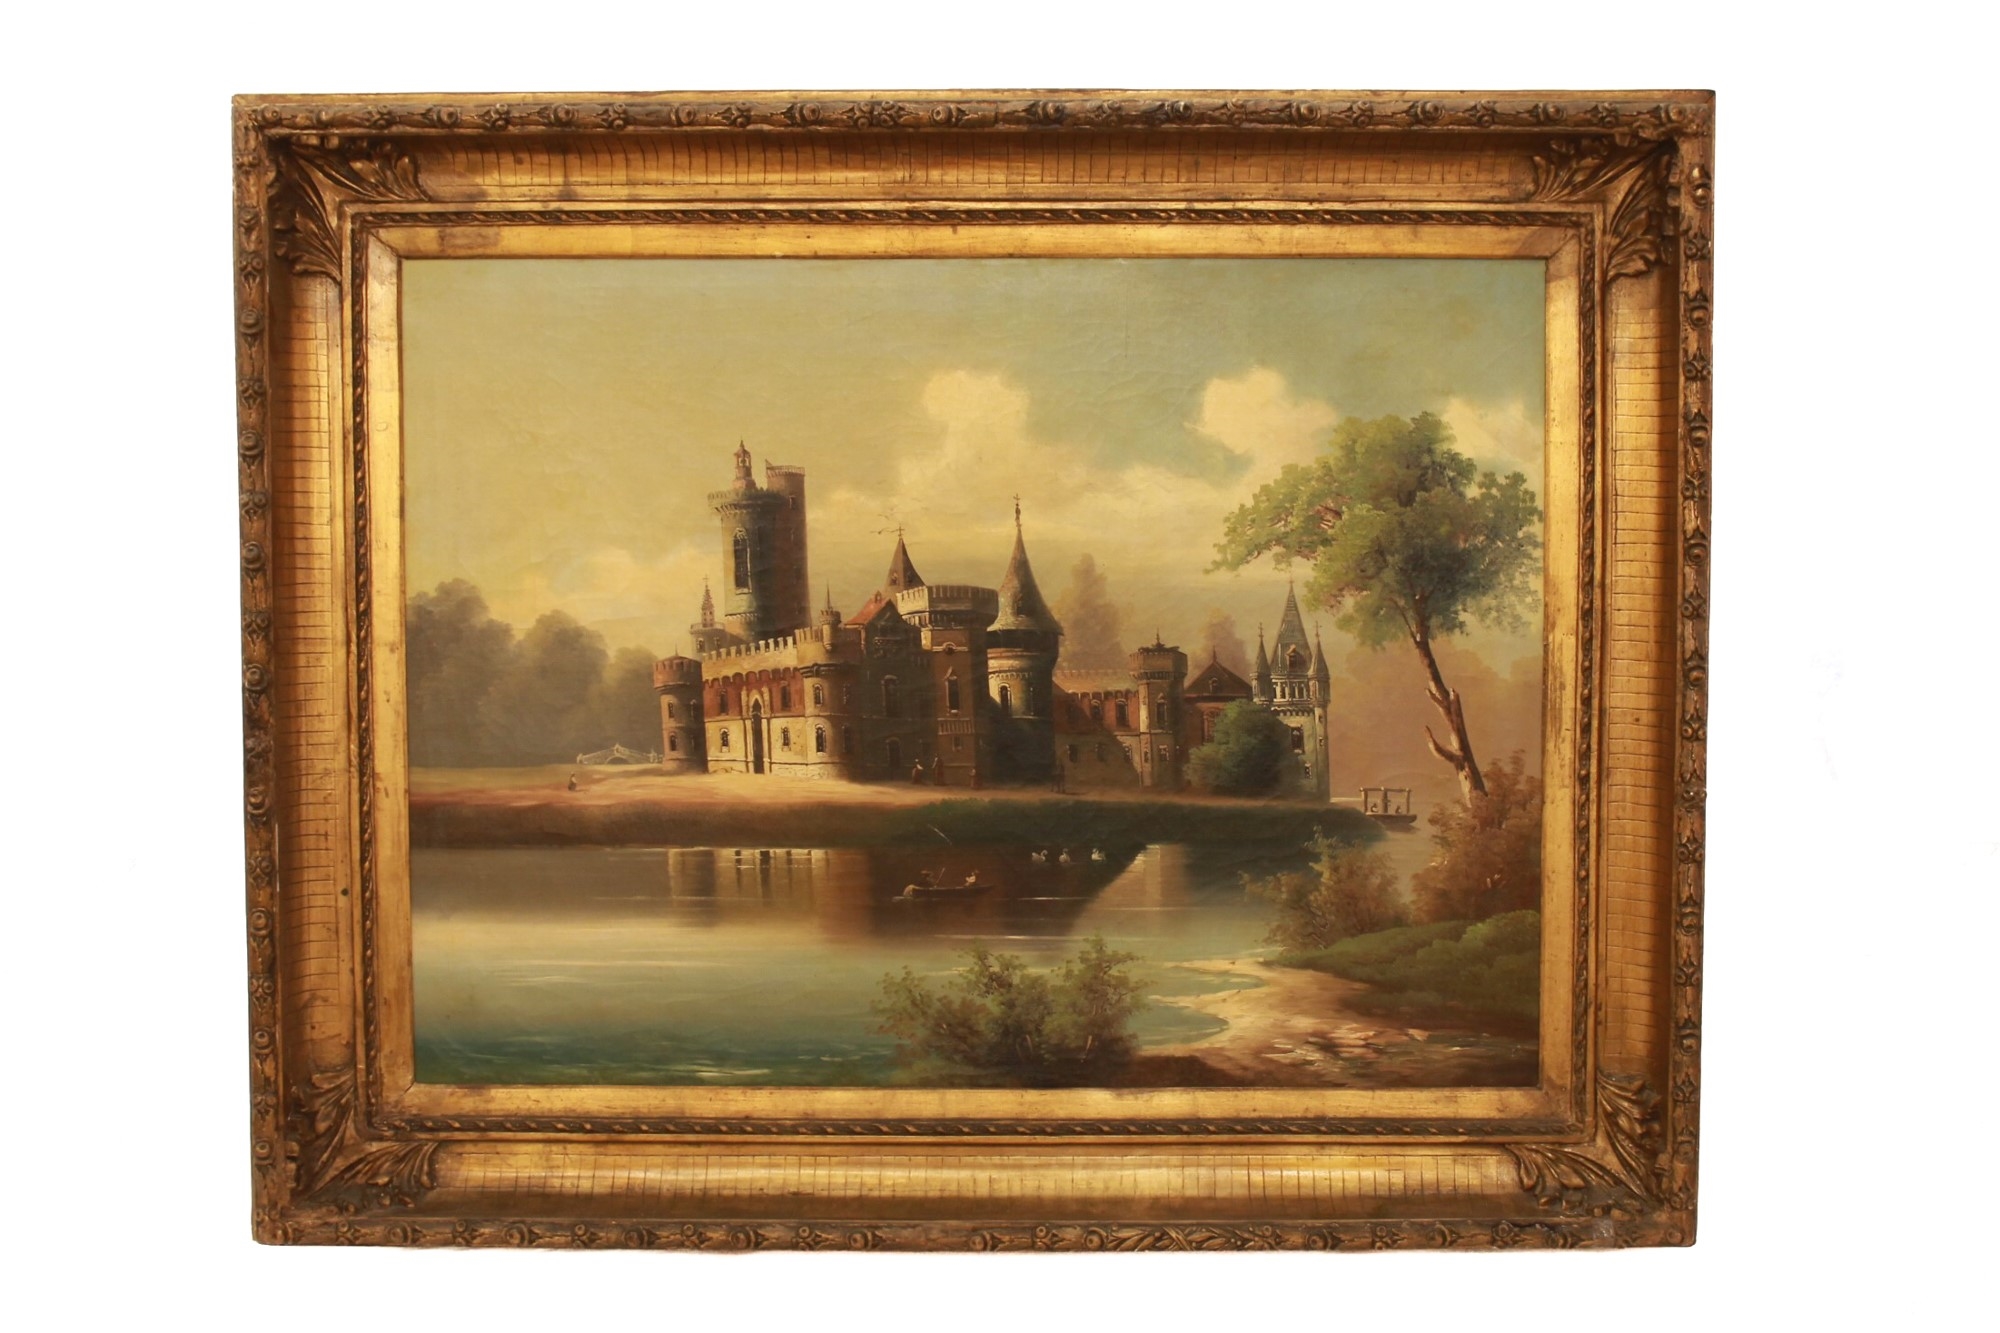 Landscape with Castle by French School, 19th Century